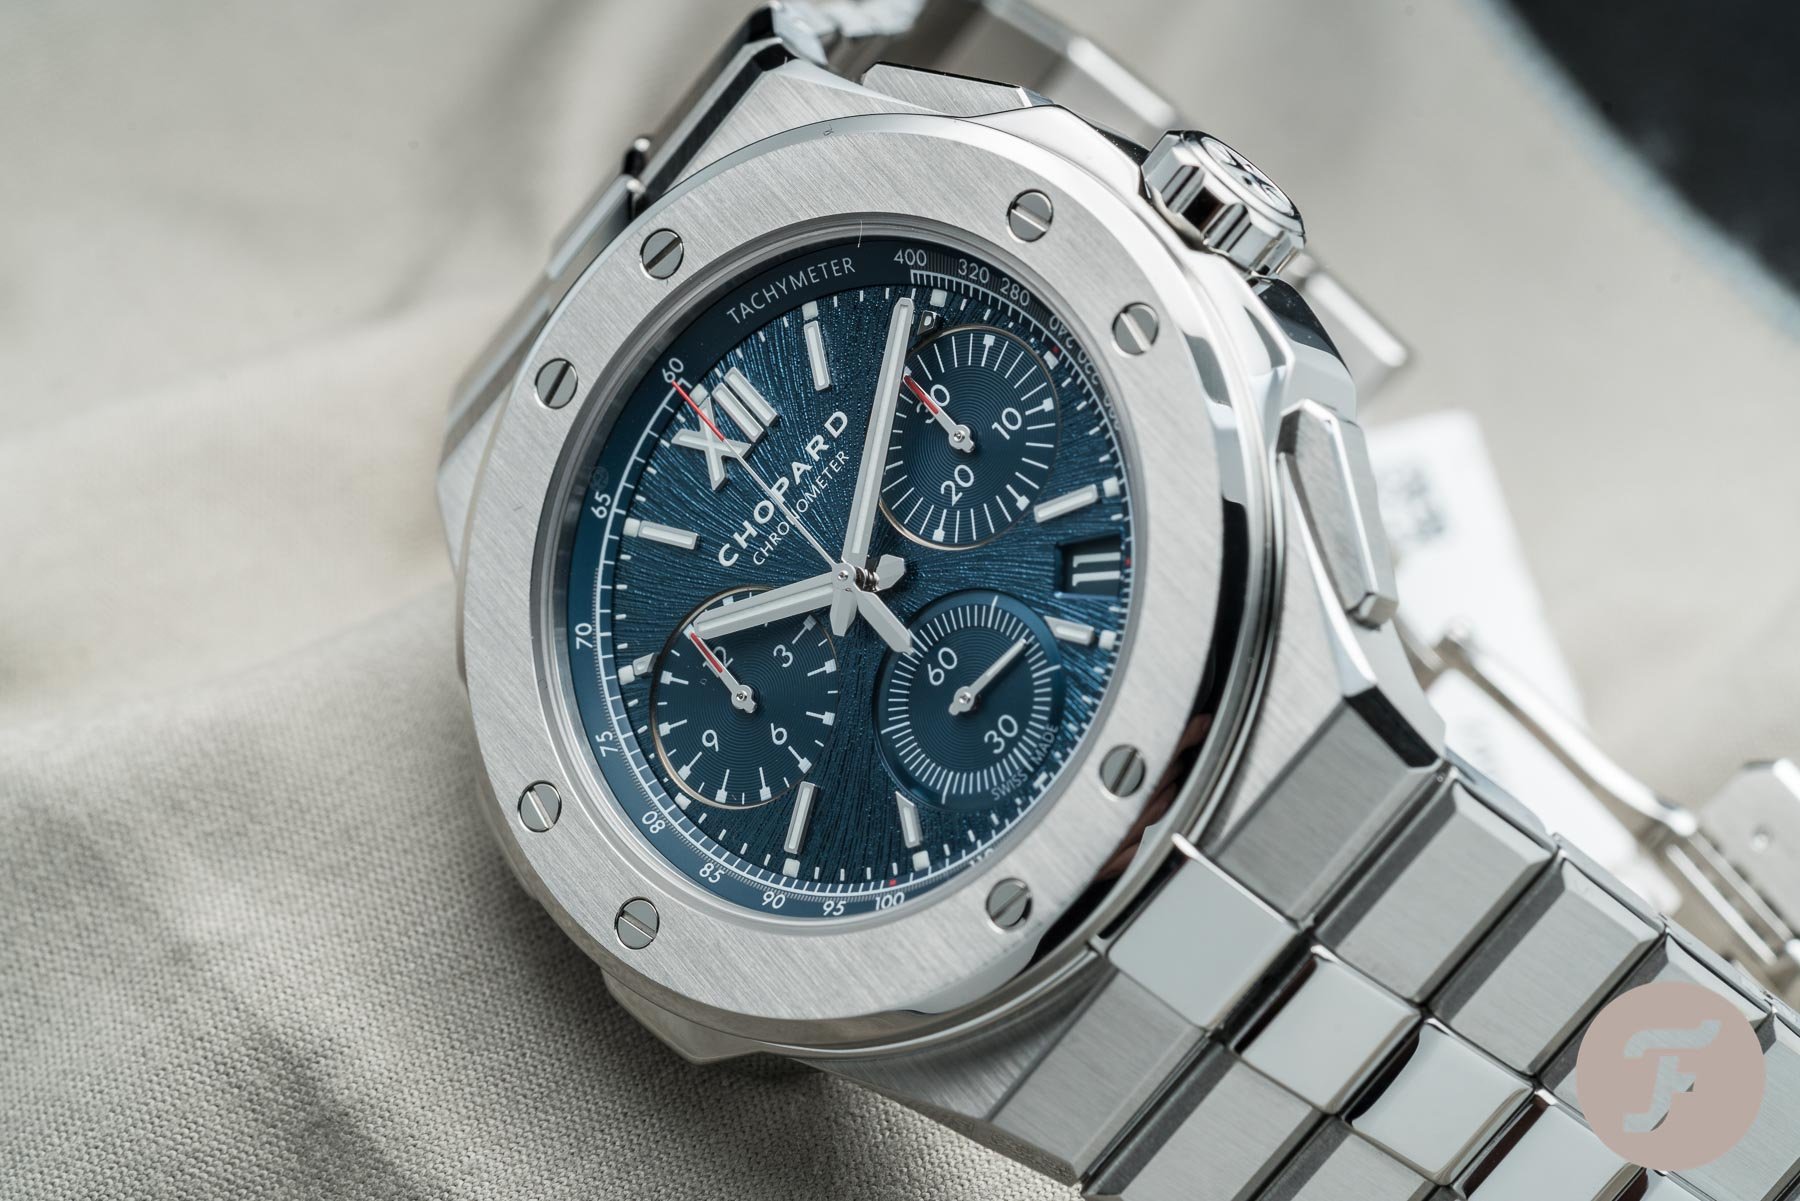 CHOPARD Alpine Eagle XL Chrono Automatic 44mm Lucent Steel and 18